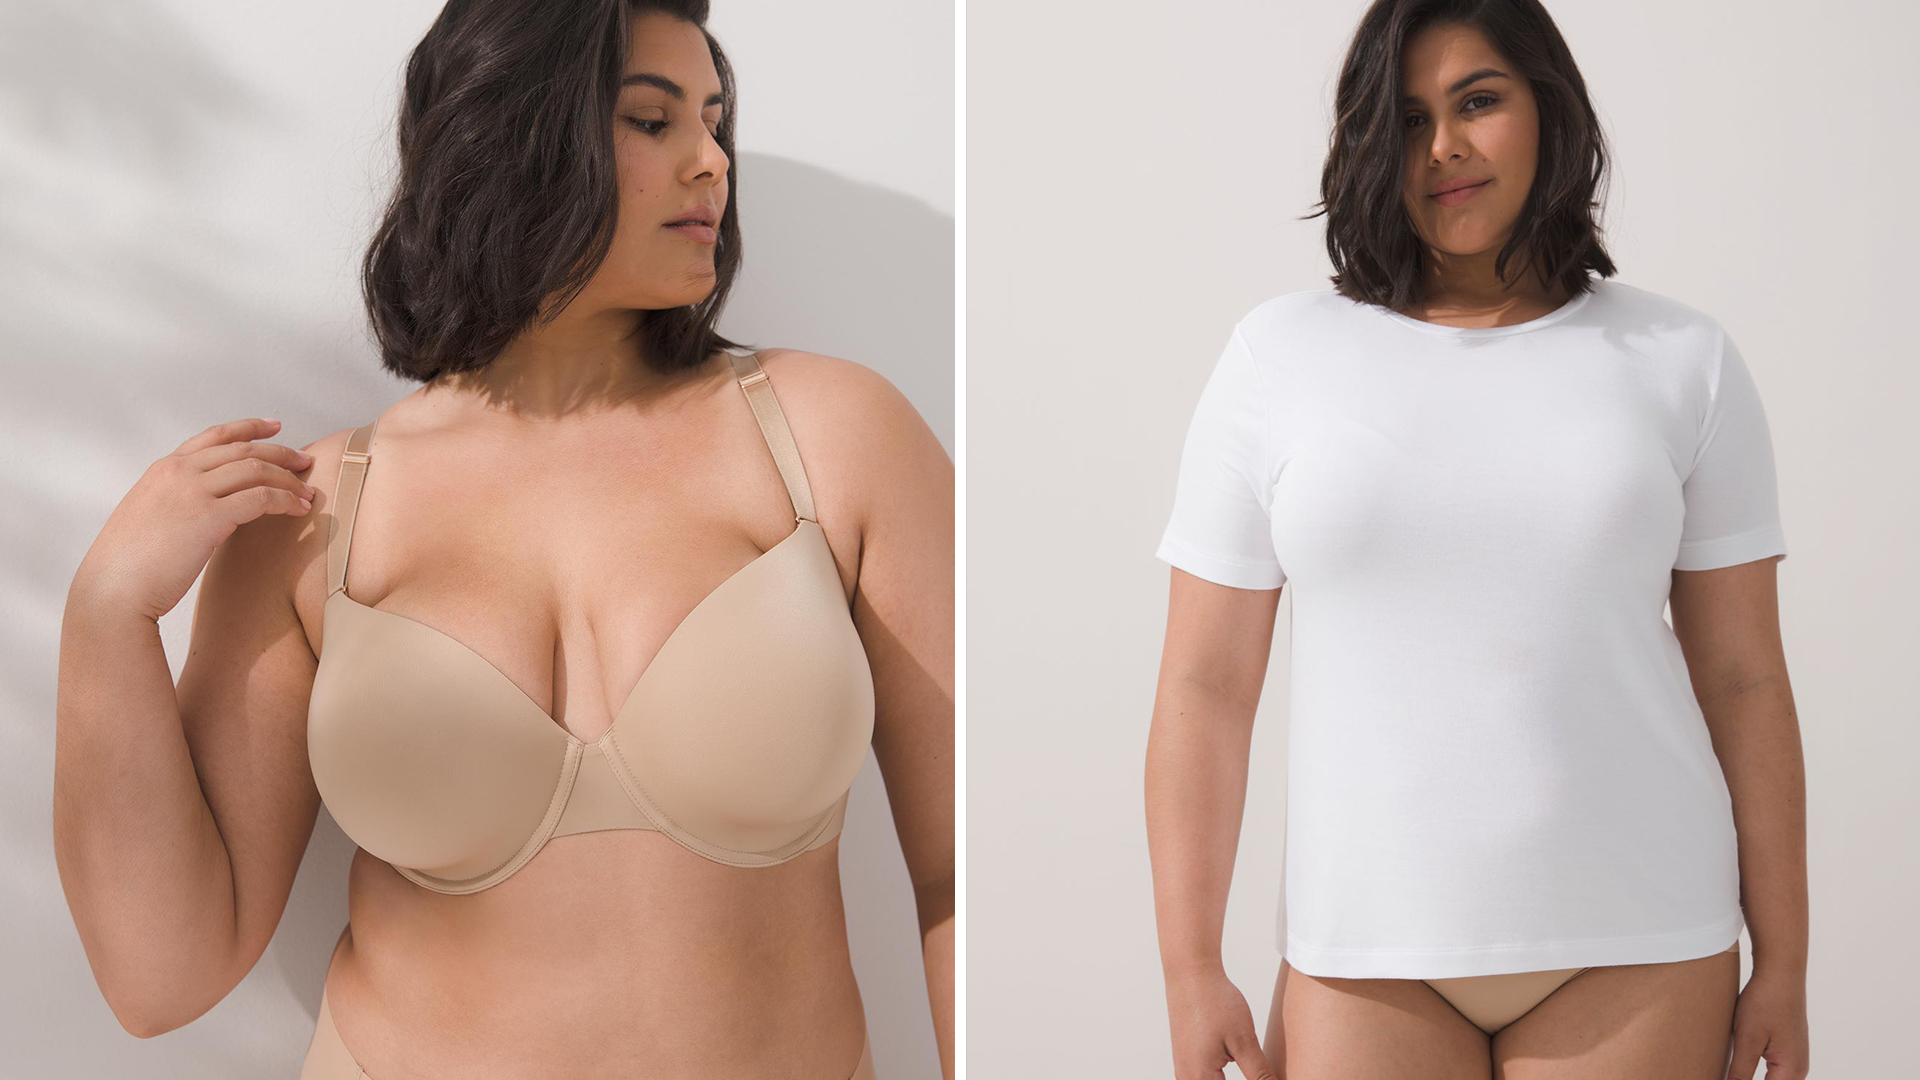 (left) Soma<sup class=st-superscript>®</sup> women’s model wearing a nude T-shirt bra and panties. (right) Soma<sup class=st-superscript>®</sup> women’s model wearing nude panties and a white T-shirt.